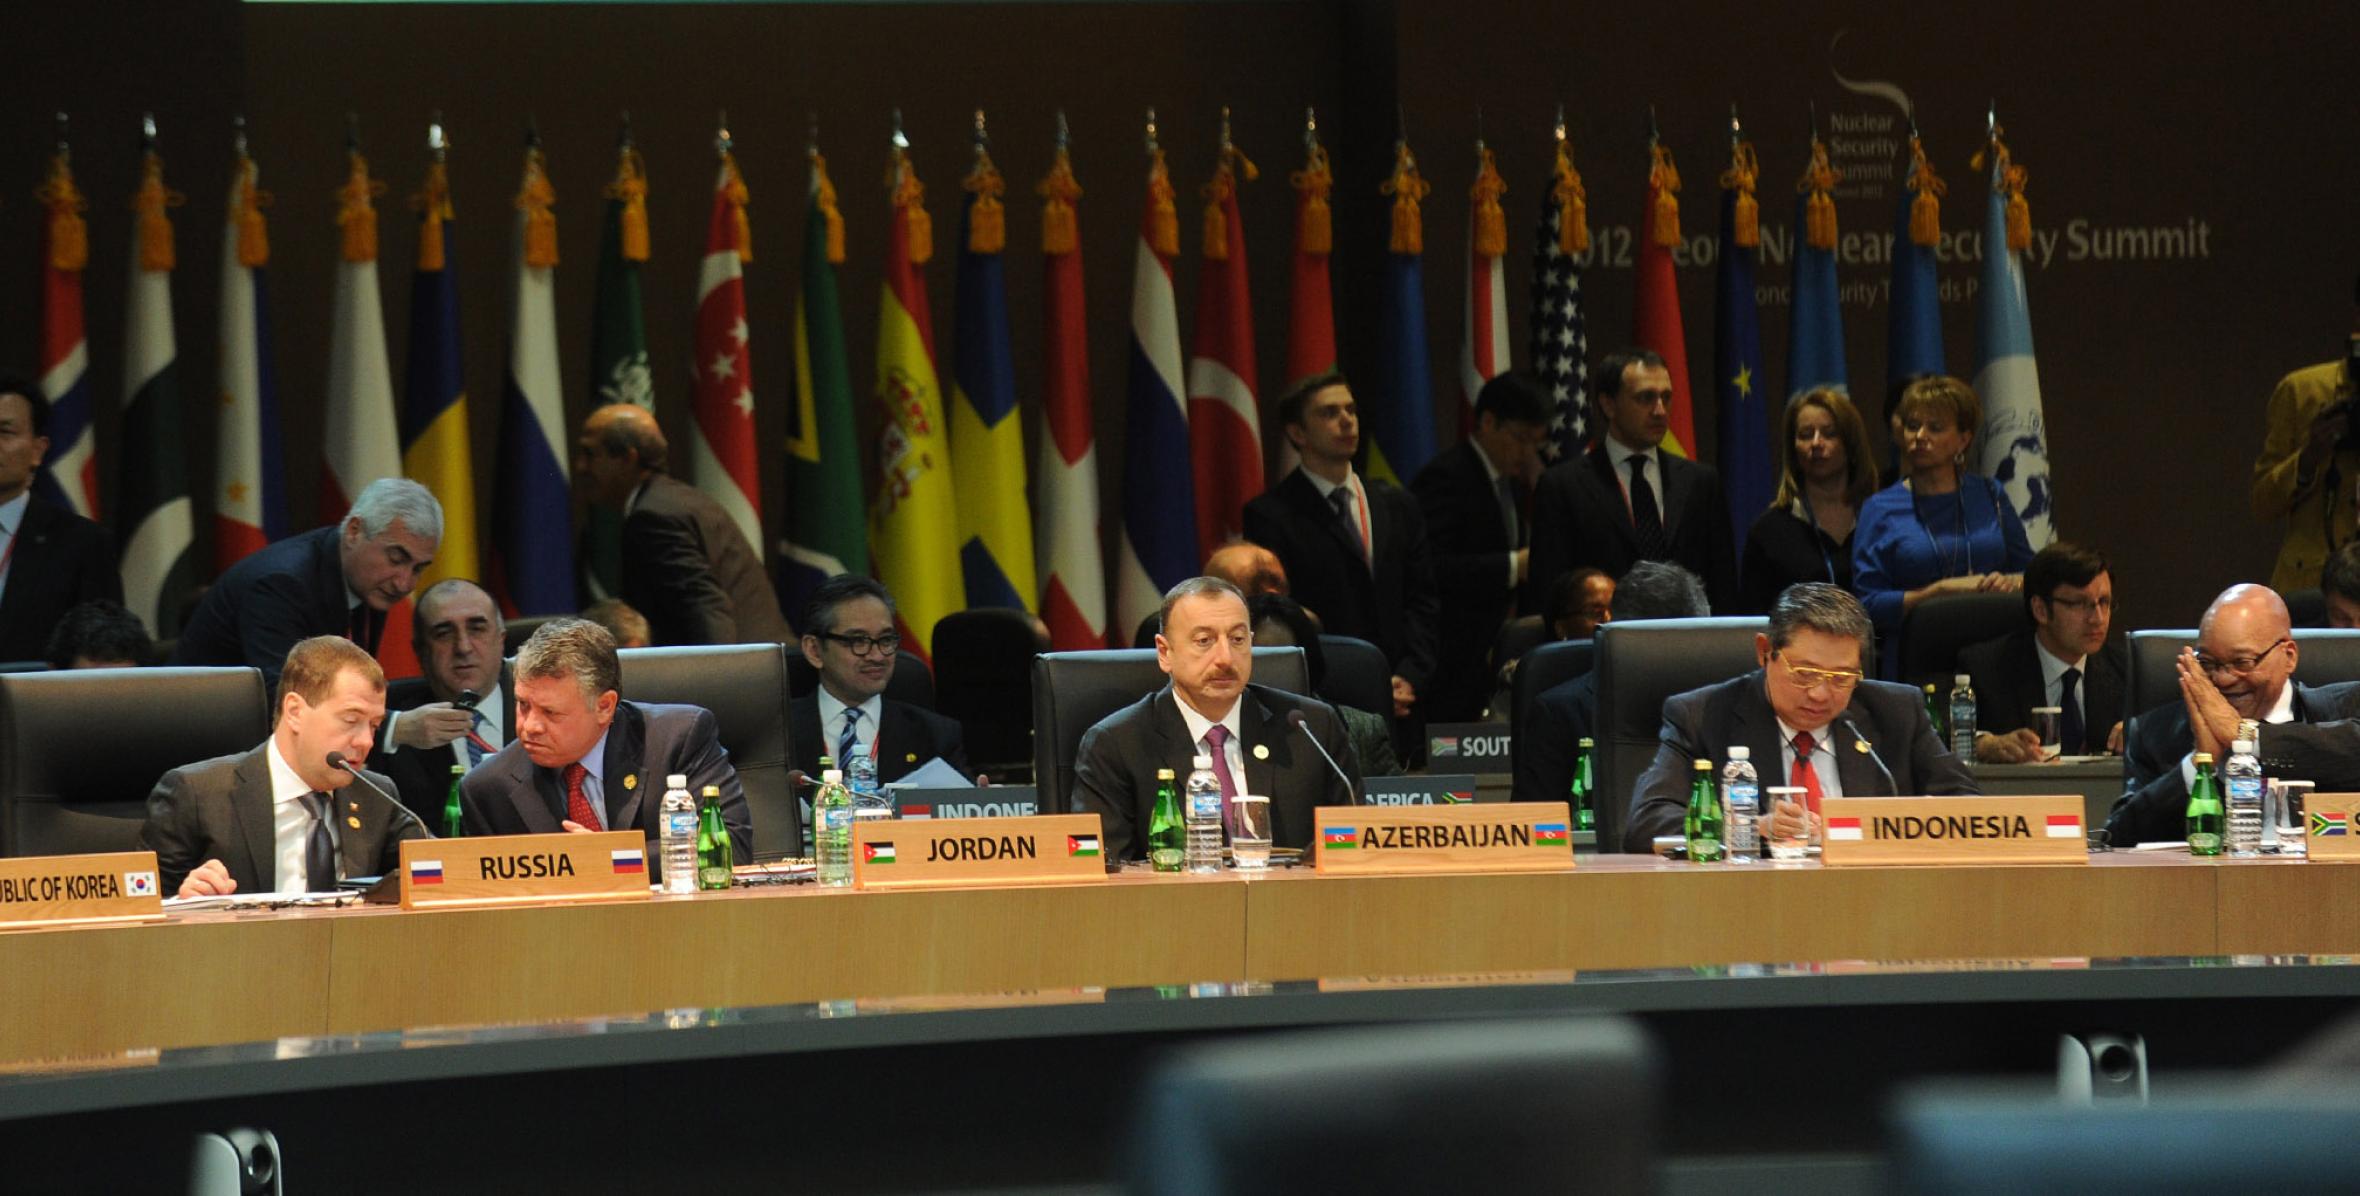 Ilham Aliyev addressed the first plenary session of the Seoul Nuclear Security Summit